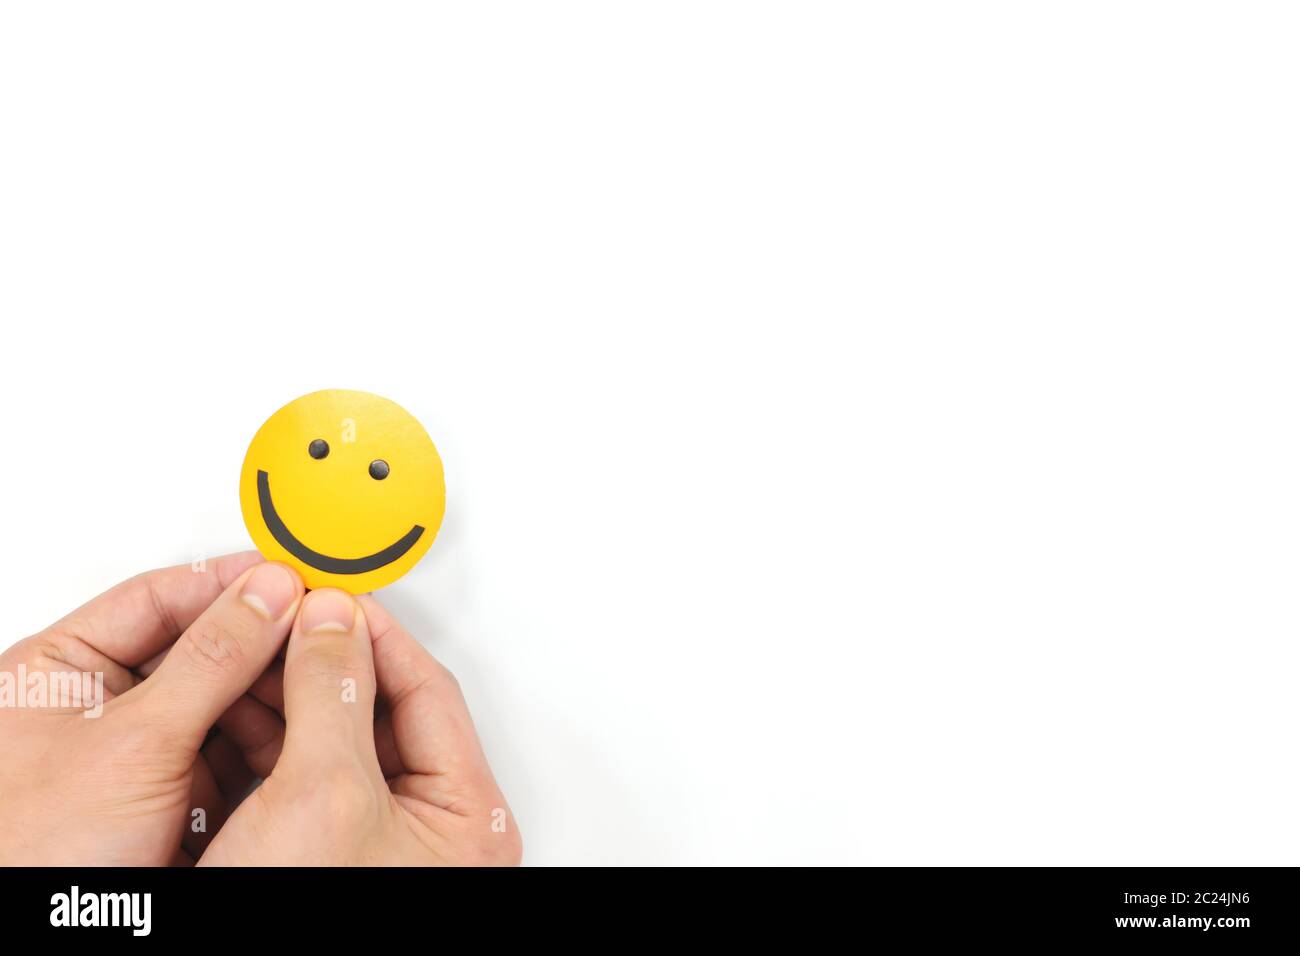 Happiness and positivity concept. Hand holding yellow smiling face in white background with copy space. Stock Photo